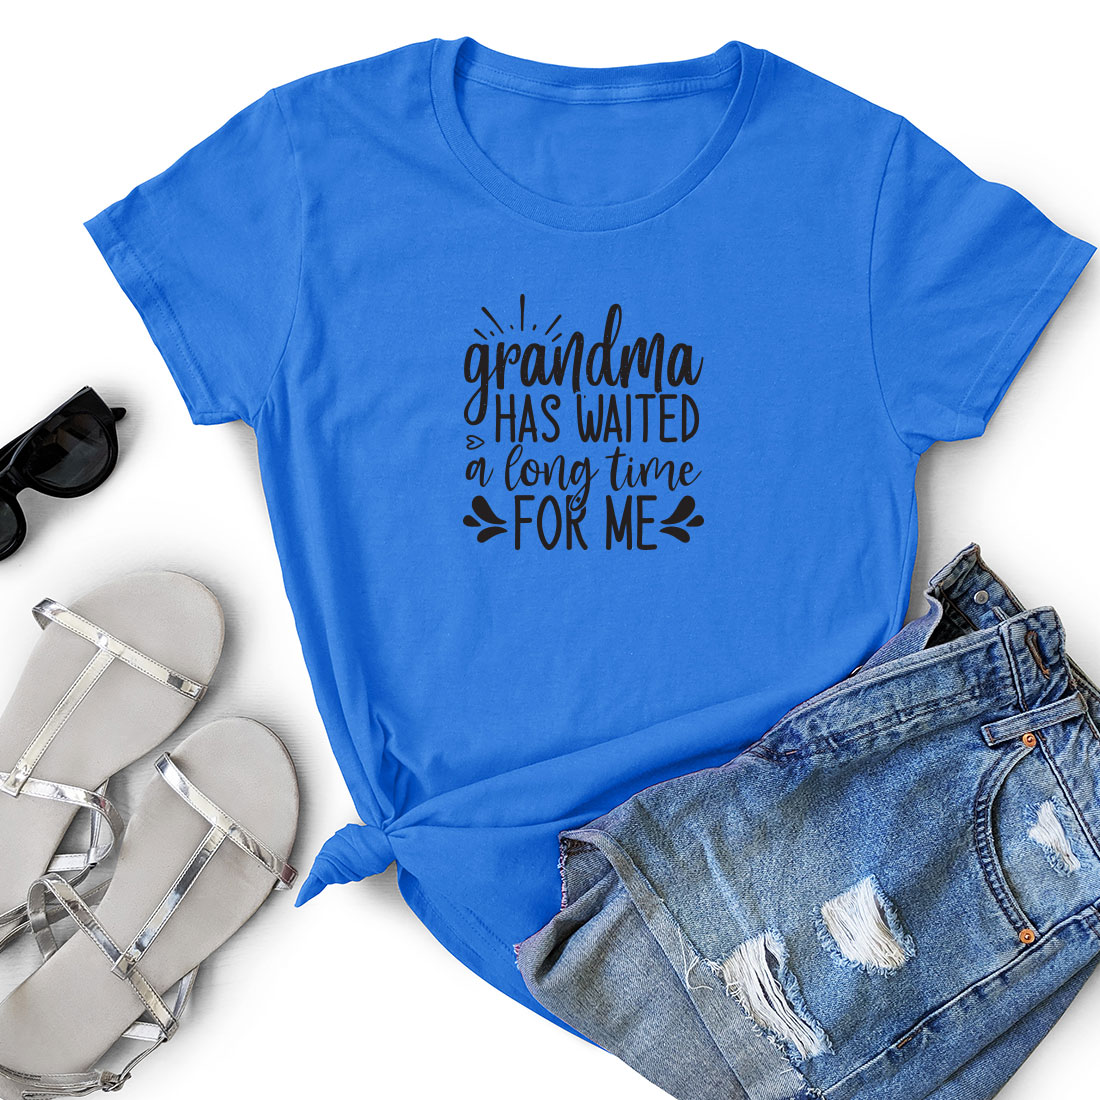 T - shirt that says grandma has waited a long time for me.